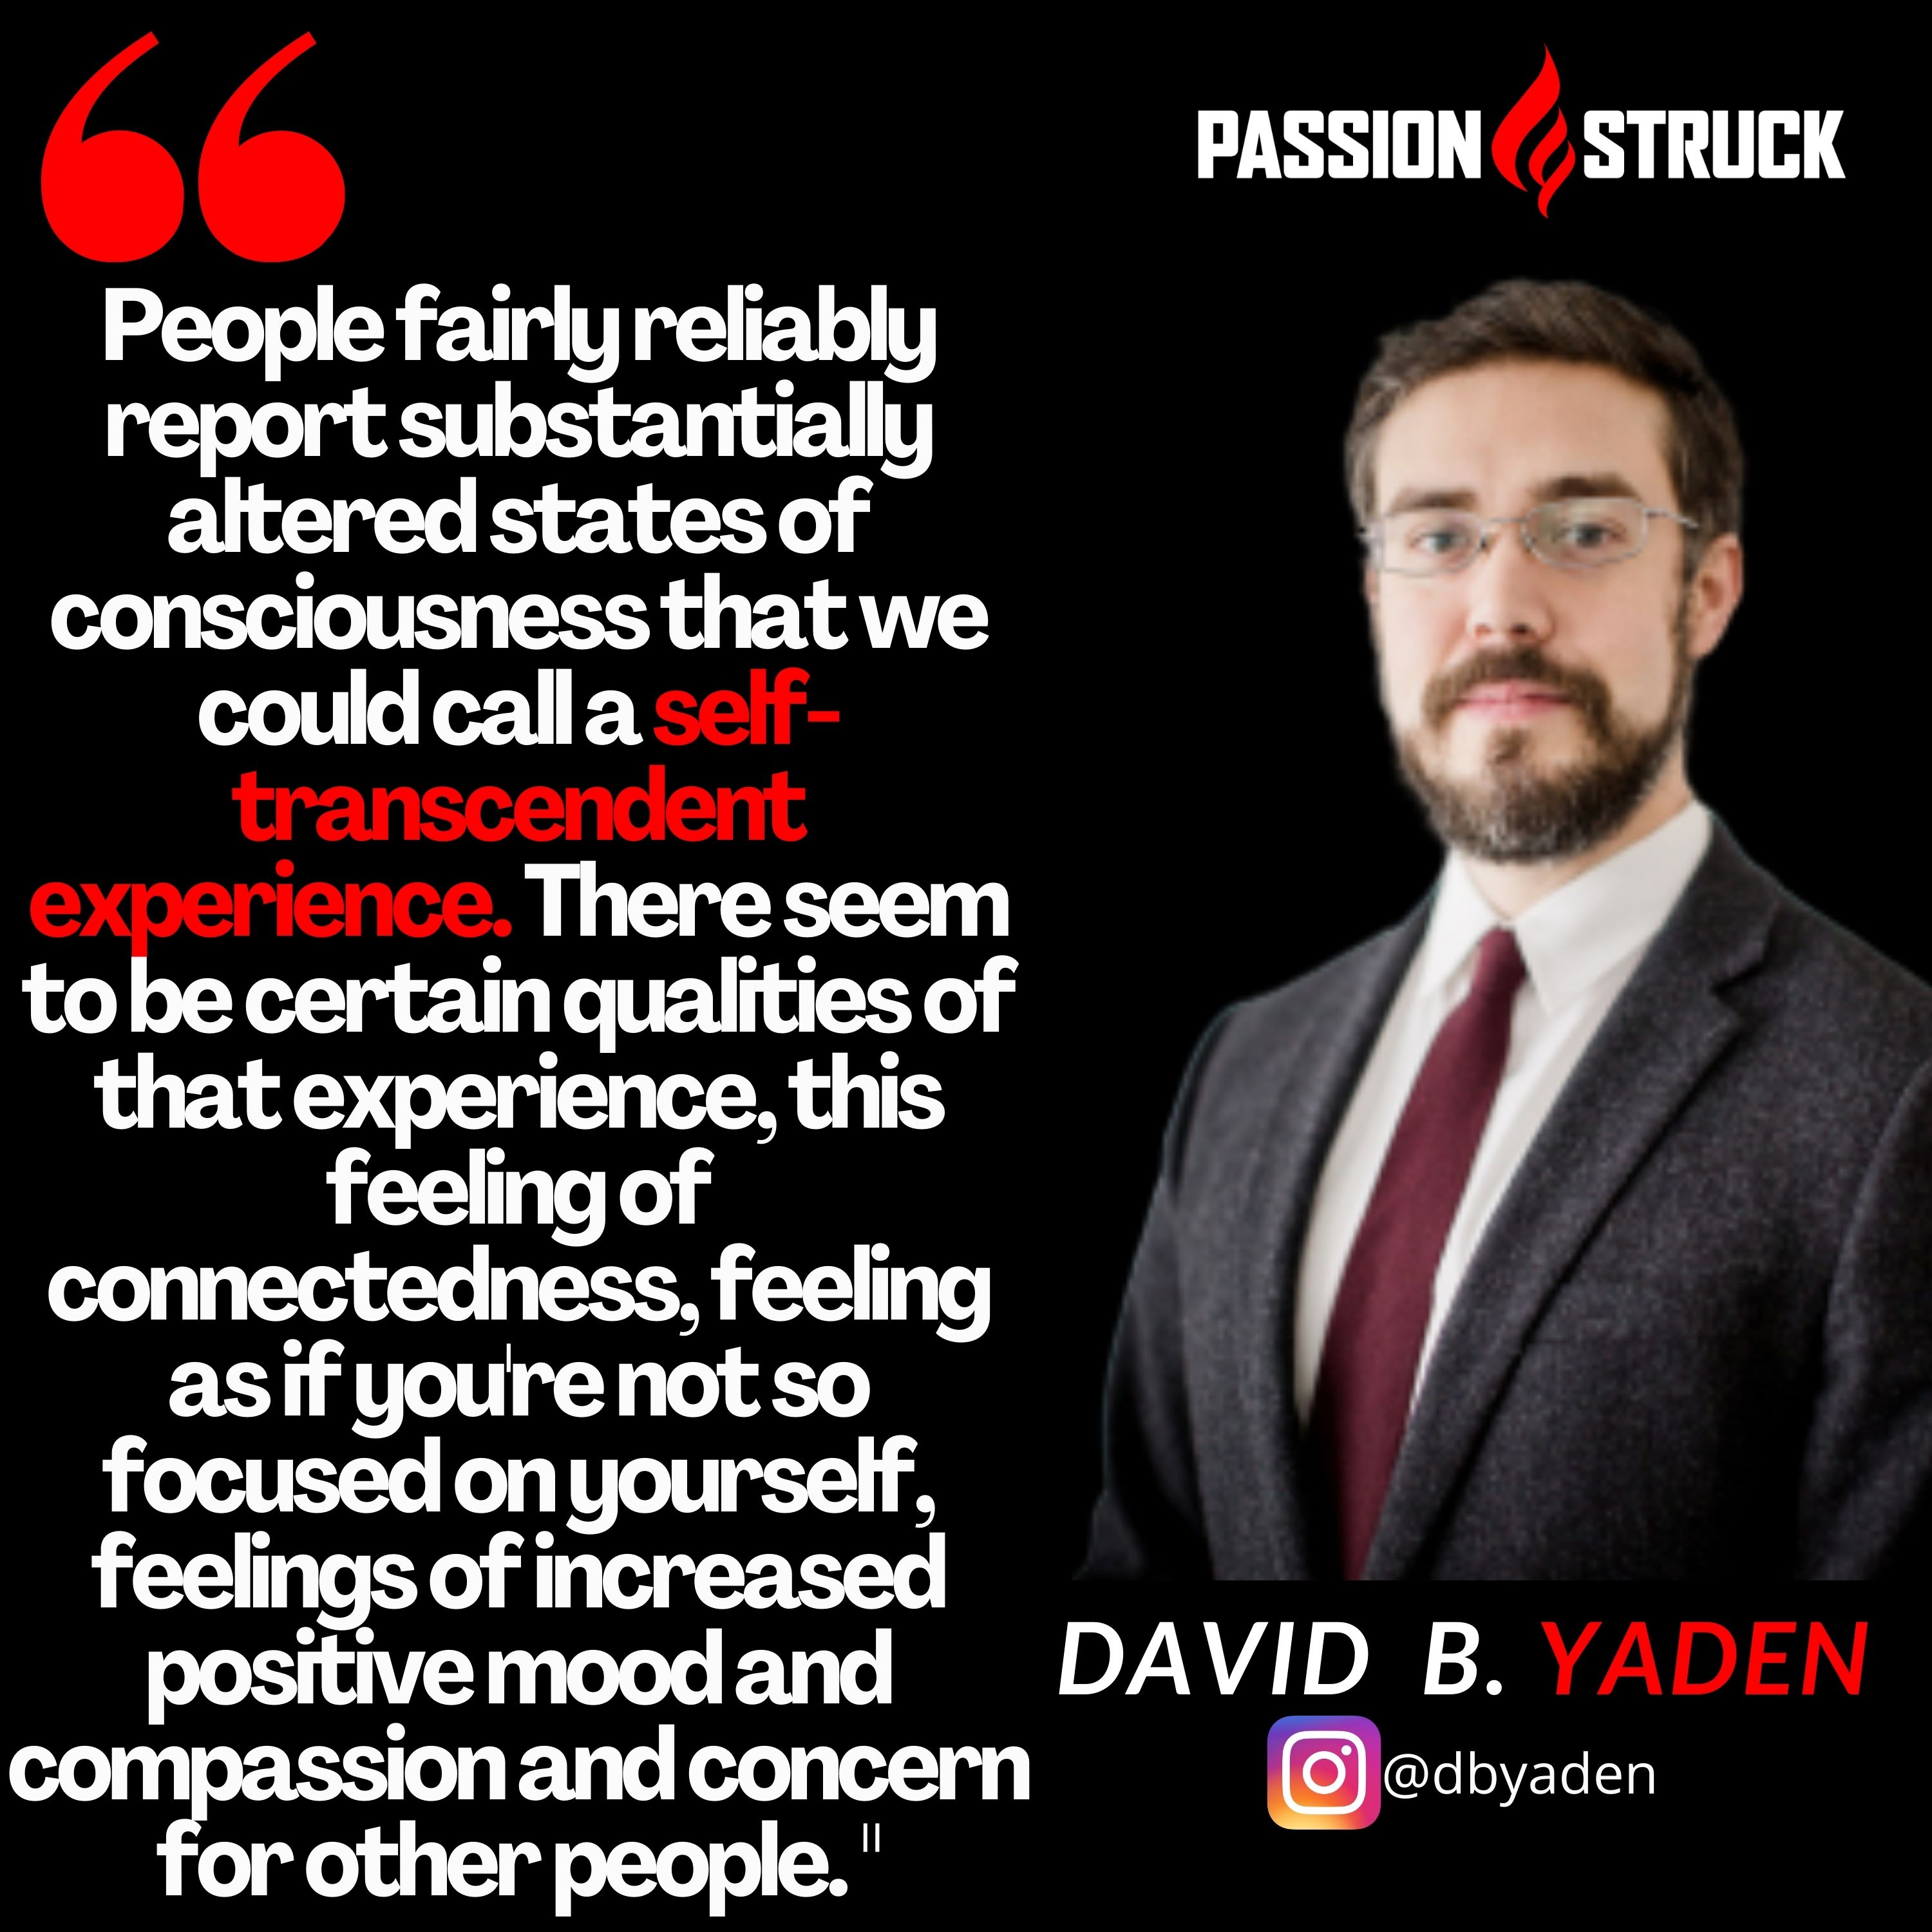 David Yaden quote on self-transcendent experiences from Passion Struck